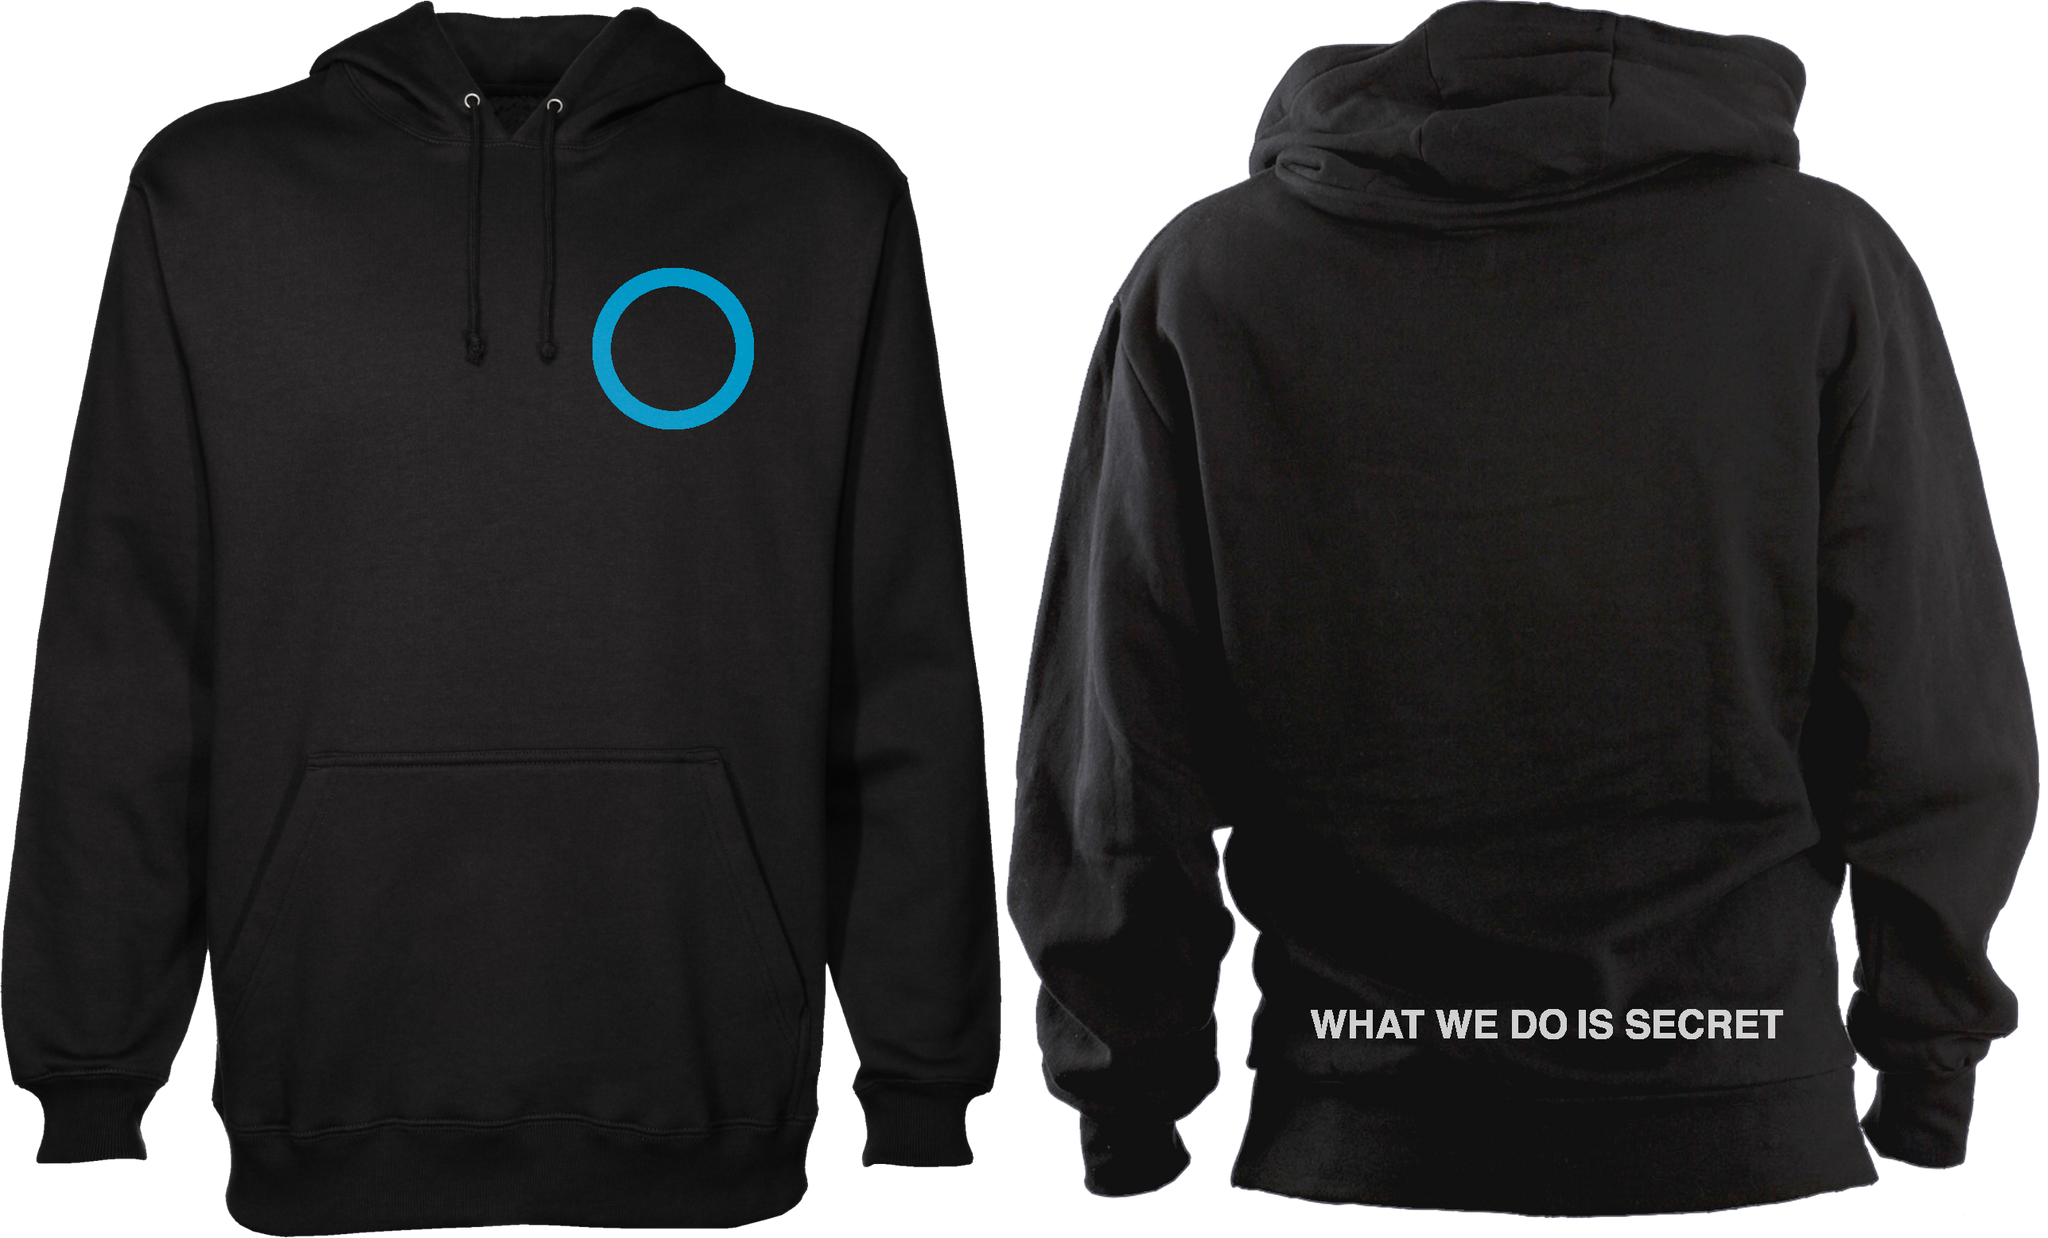 GERMS "WHAT WE DO IS SECRET" HOODED PULLOVER SWEATSHIRT